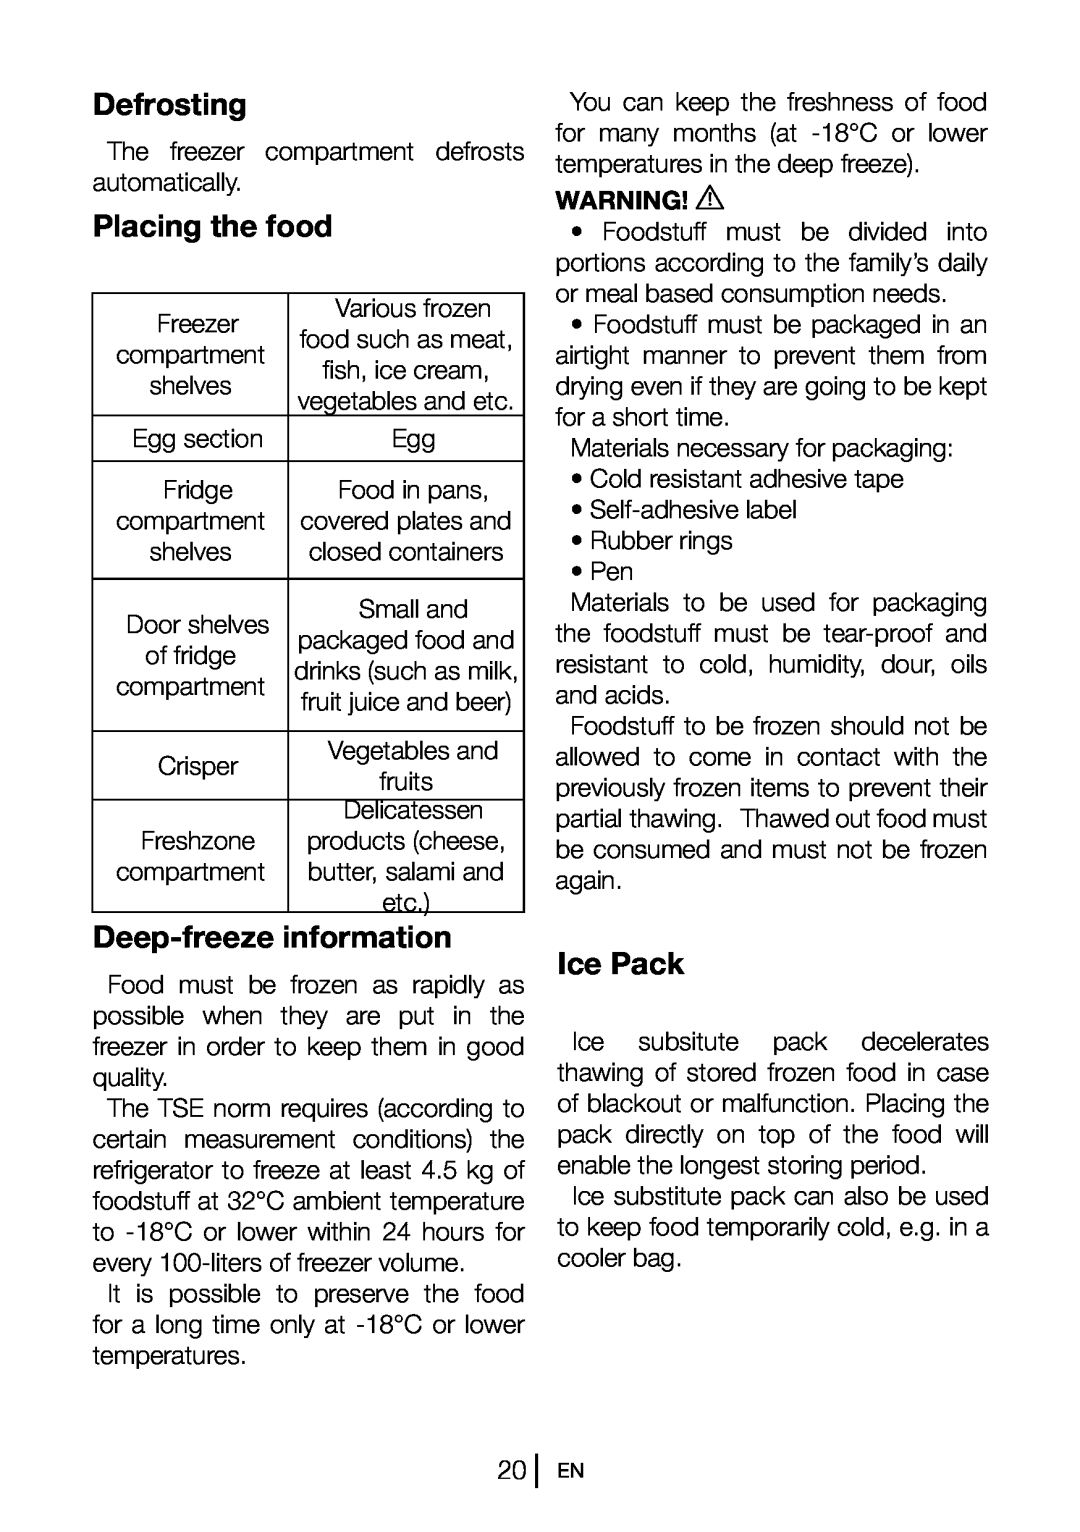 Beko FN 130430 manual Defrosting, Placing the food, Deep-freezeinformation, Ice Pack, Warning! A 